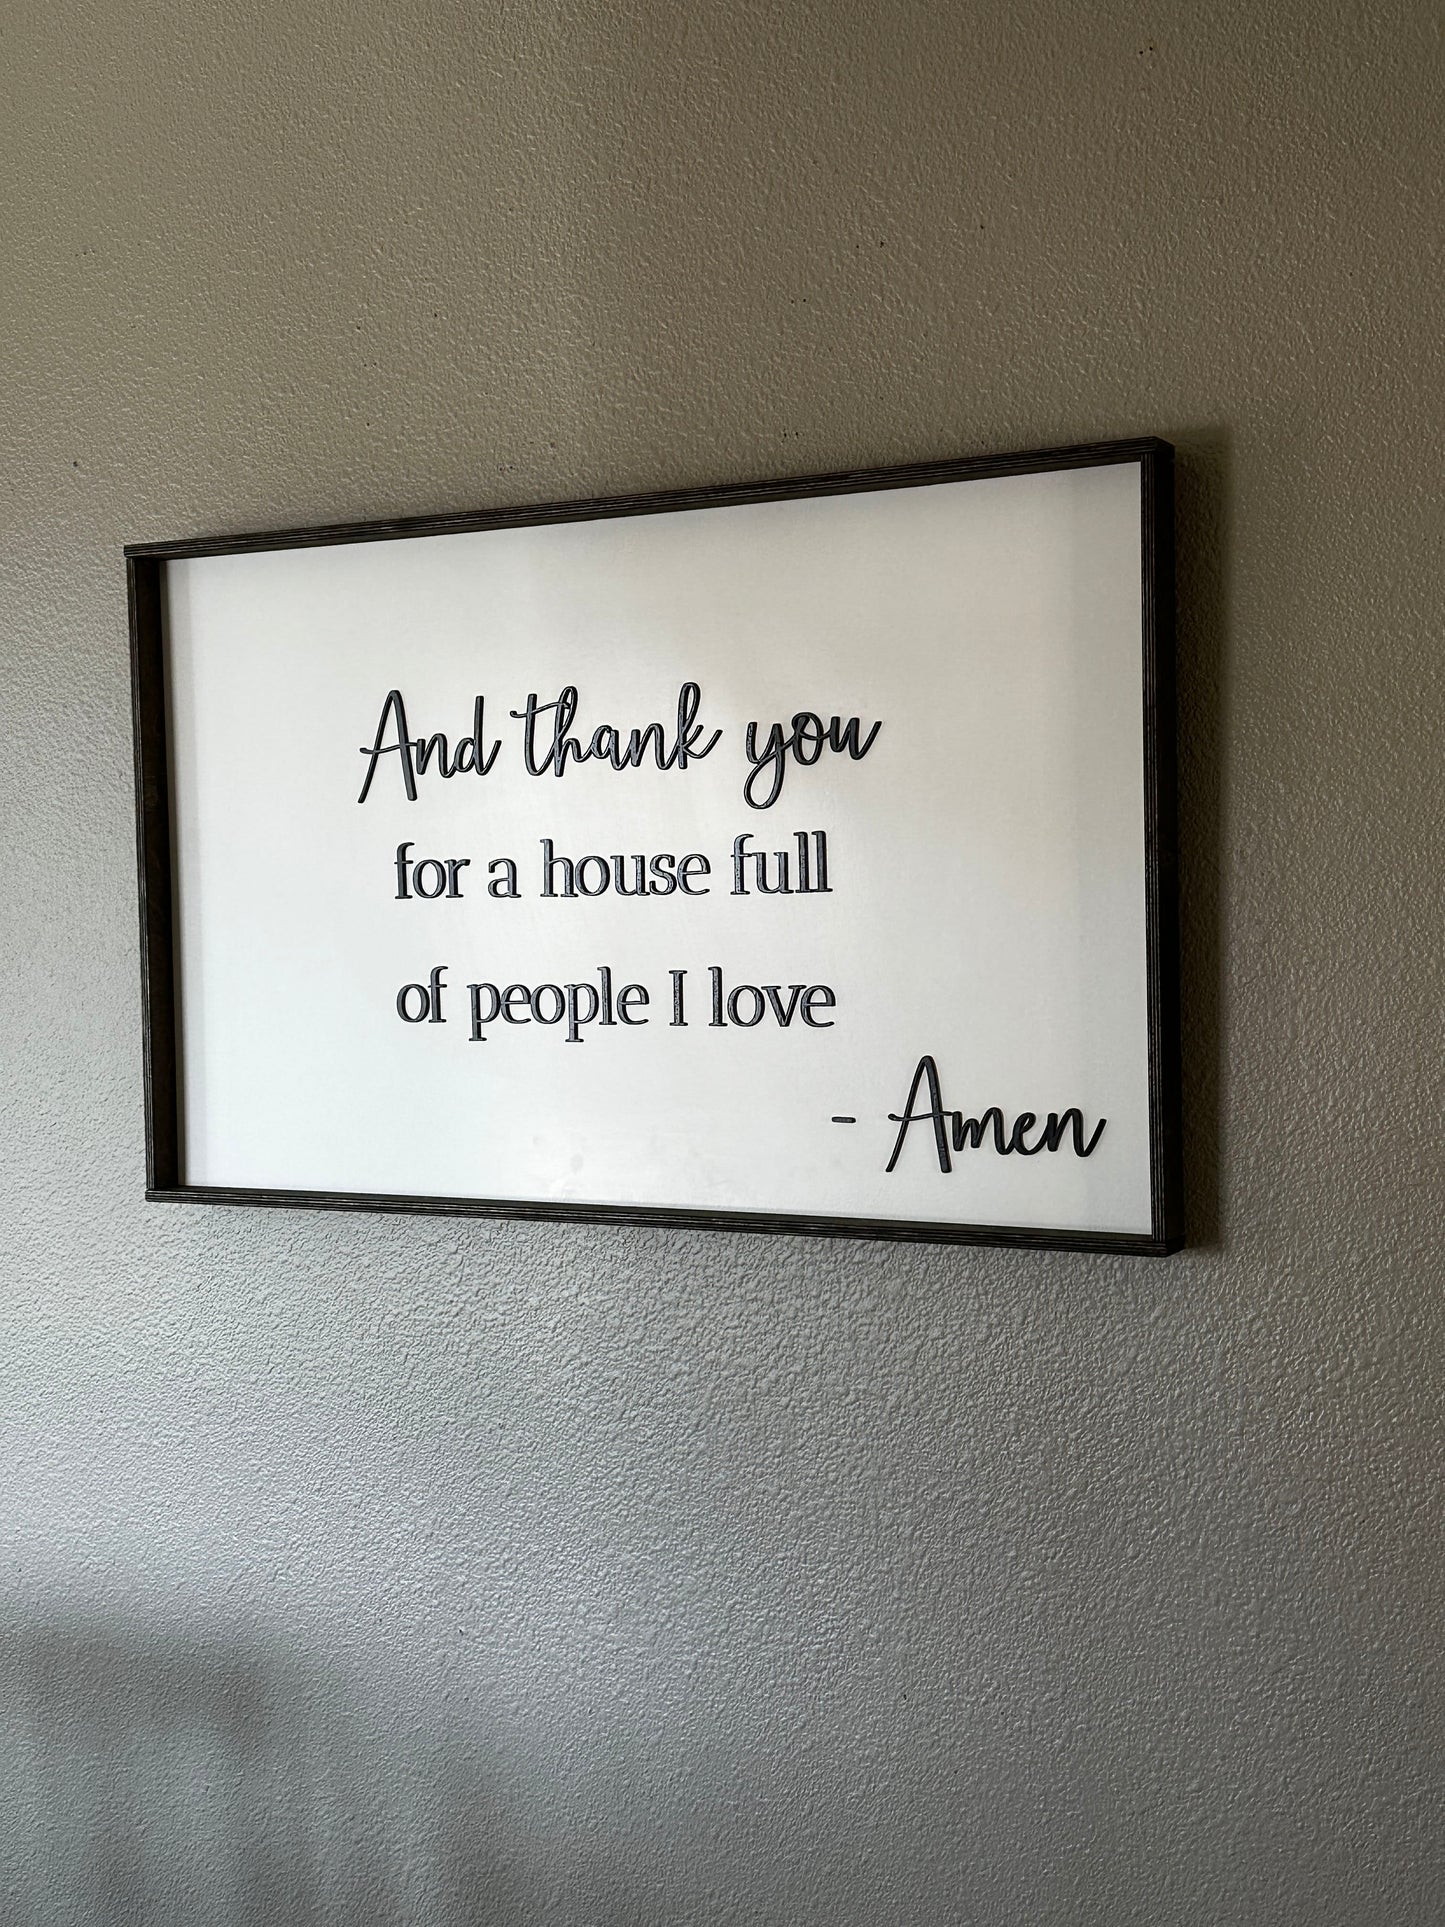 And thank you for a house full of people I love- Amen wall sign